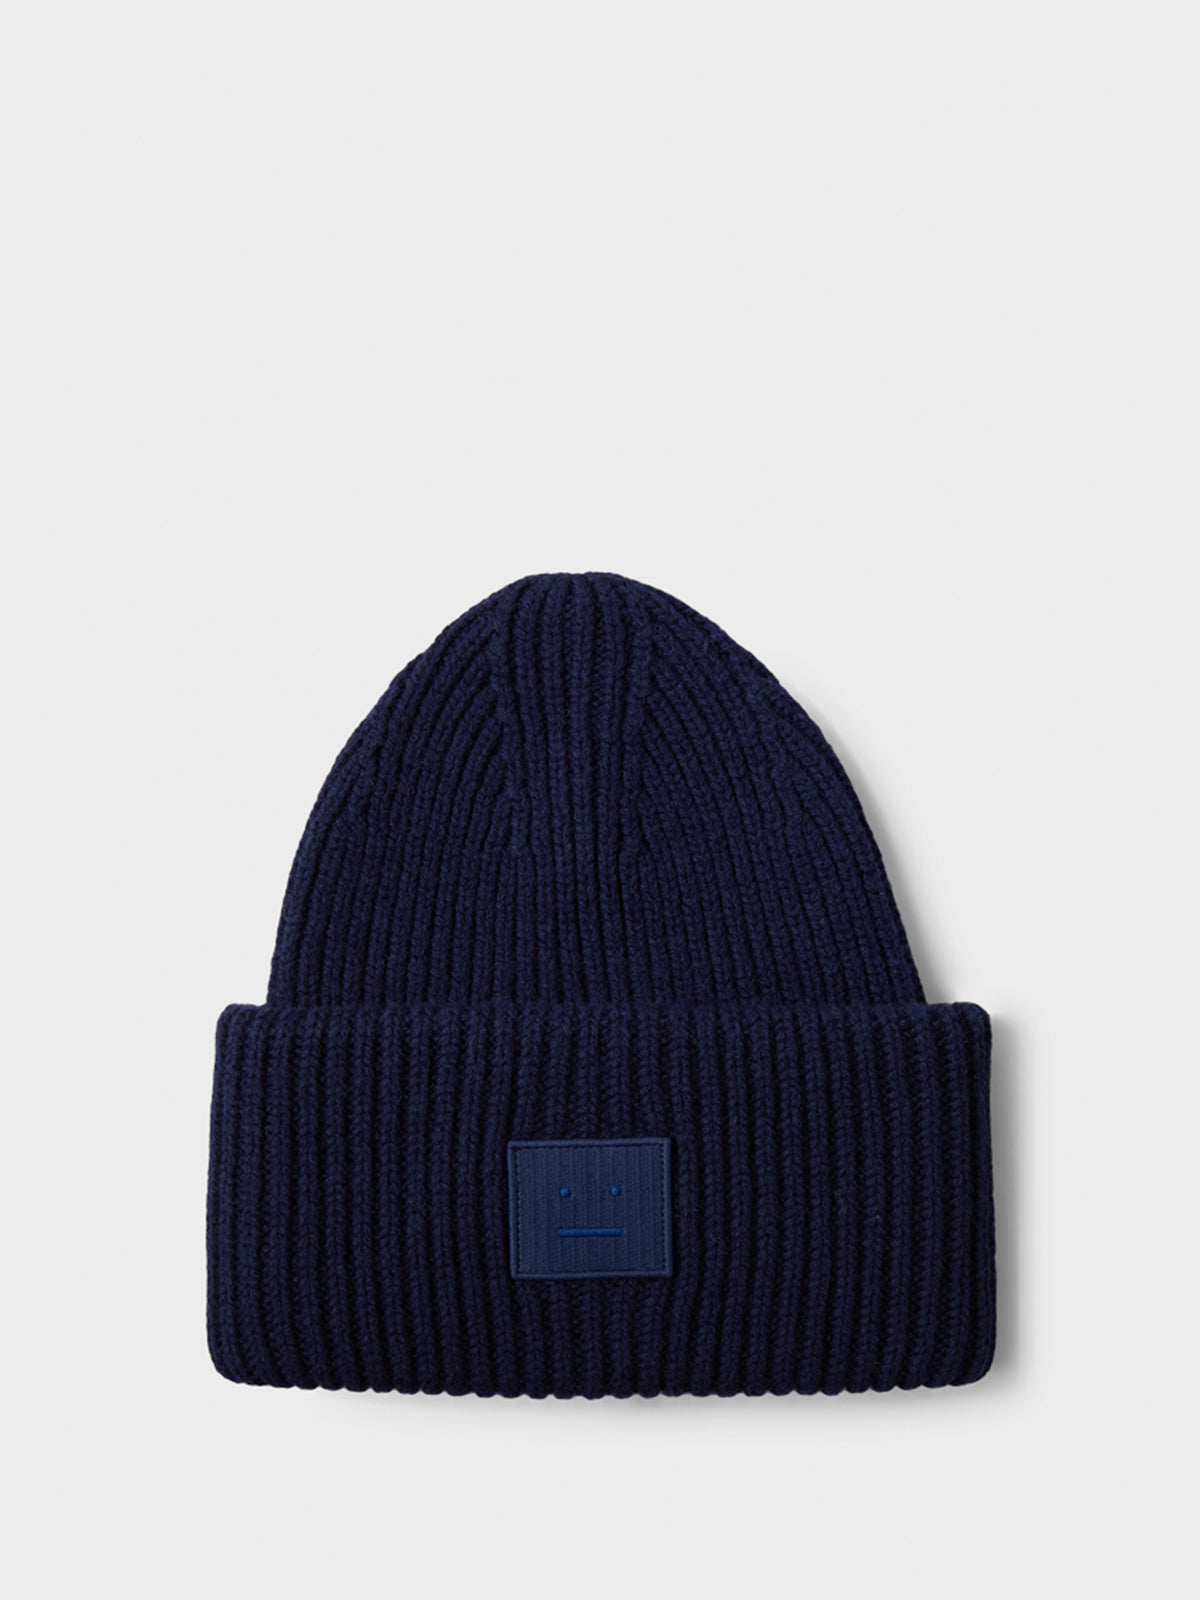 Acne Studios Face - Ribbed Knit Beanie Hat in Navy